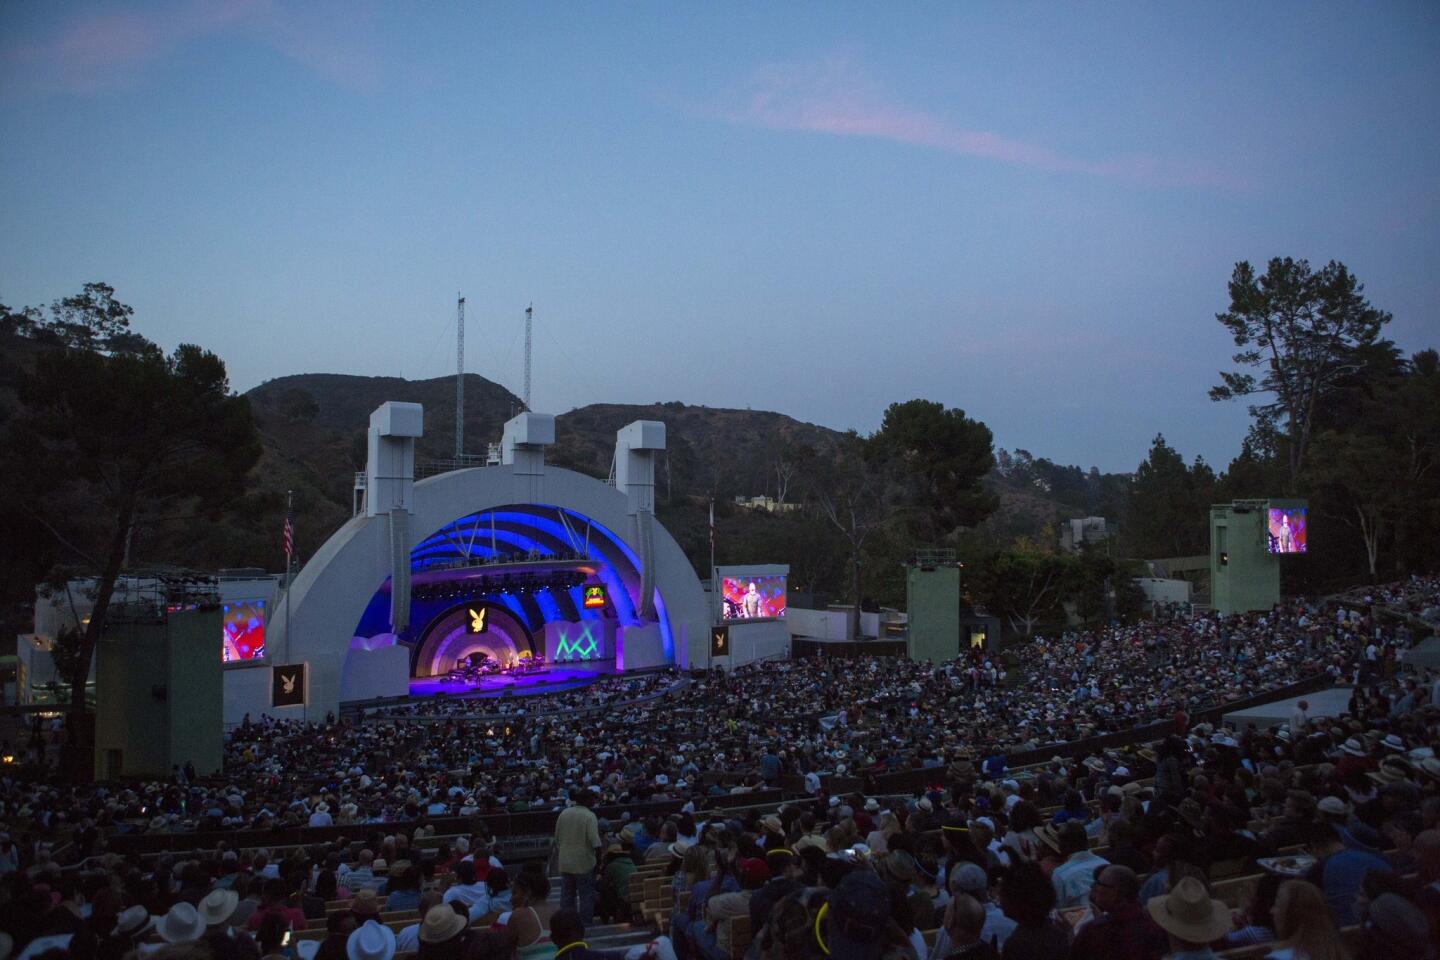 Jazz fans watch as Jamie Cullum performs during the 36th Playboy Jazz Festival at the Hollywood Bowl.